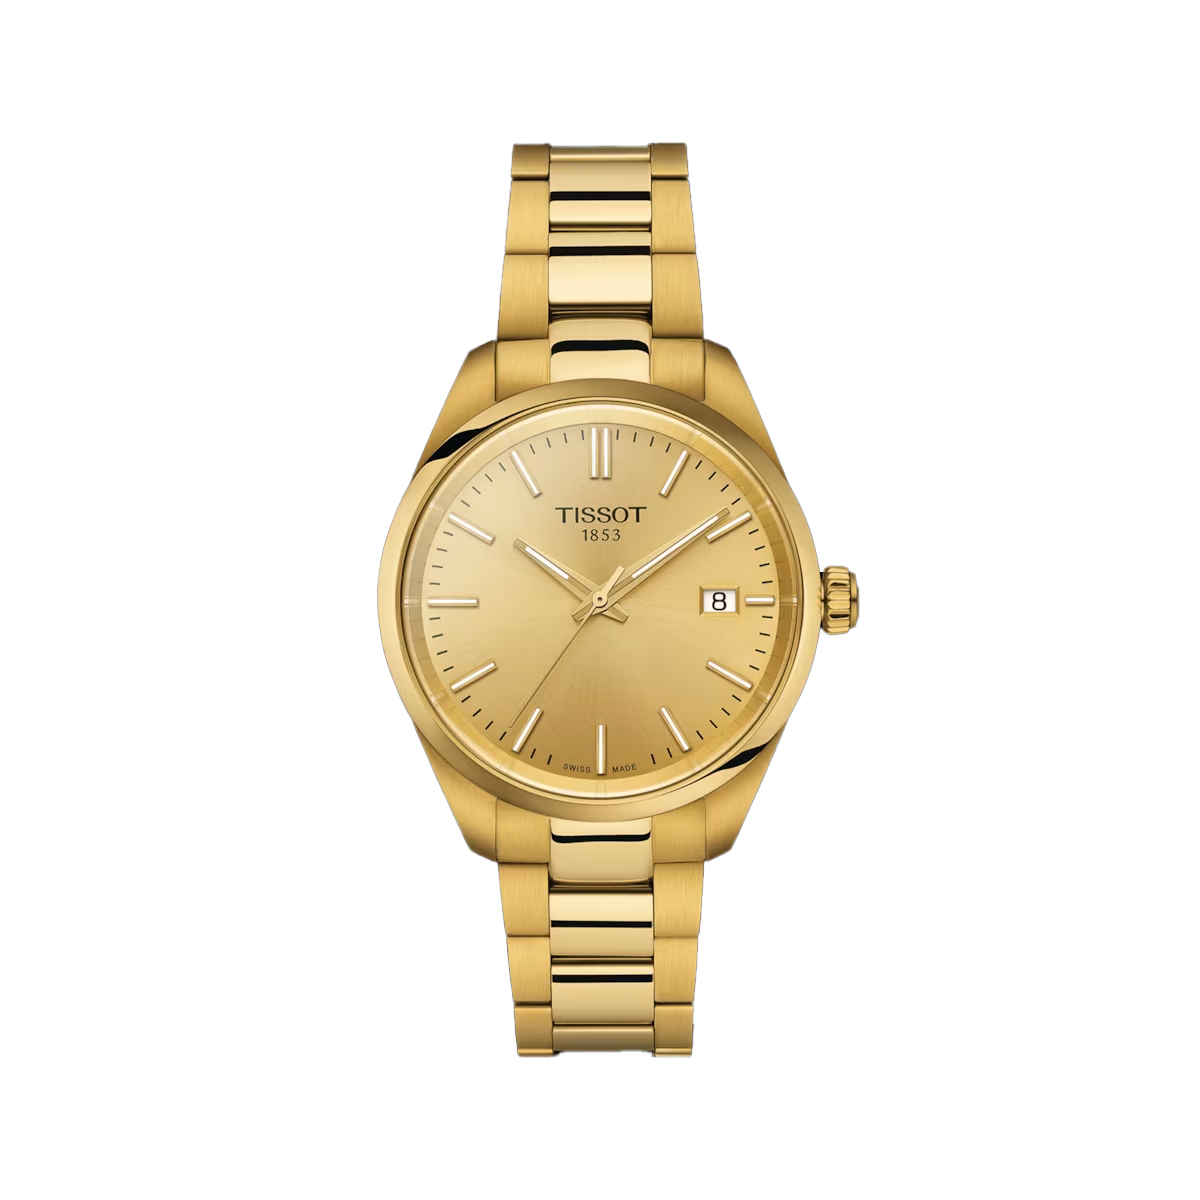 Stainless Steel Yellow Gold Tissot Plated PR 100